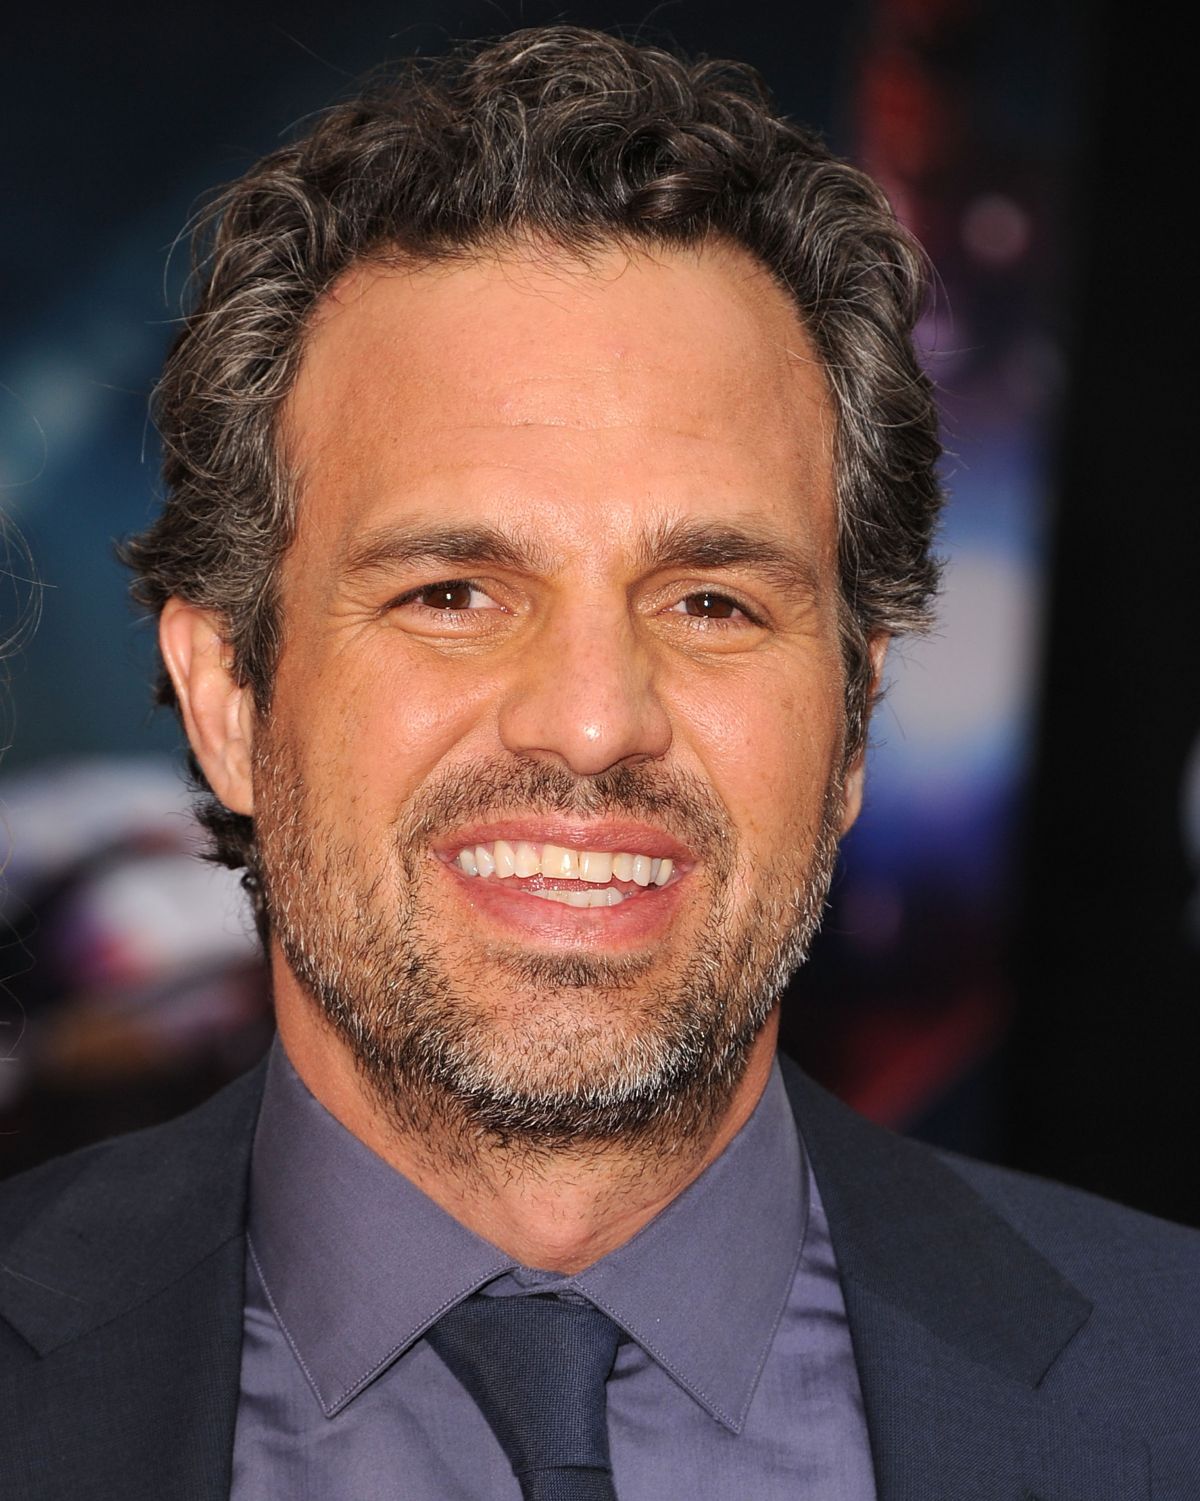 Actor Mark Ruffalo thank doctors in this way